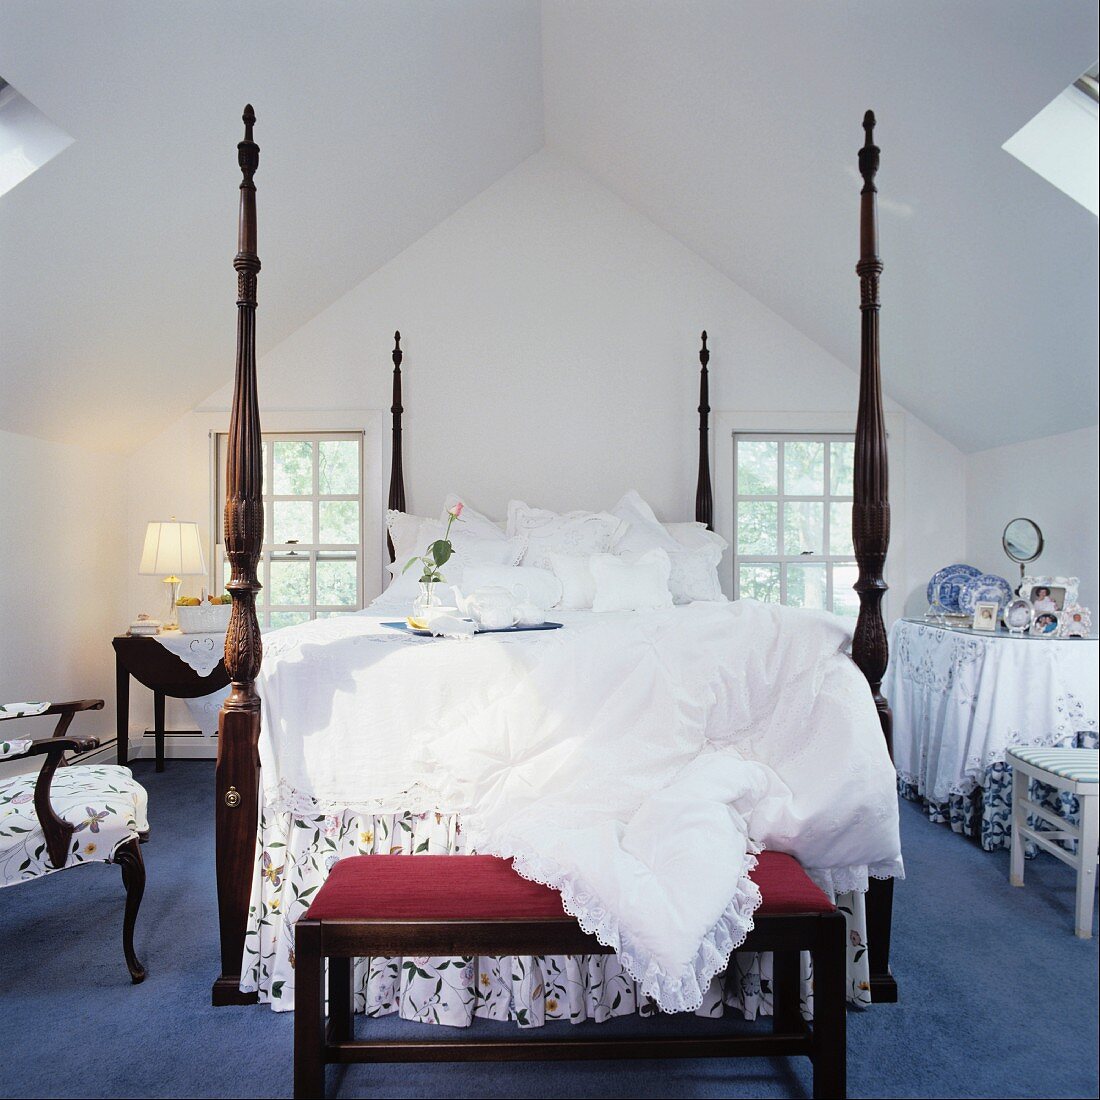 Grand bed with high bedposts and ottoman in attic bedroom